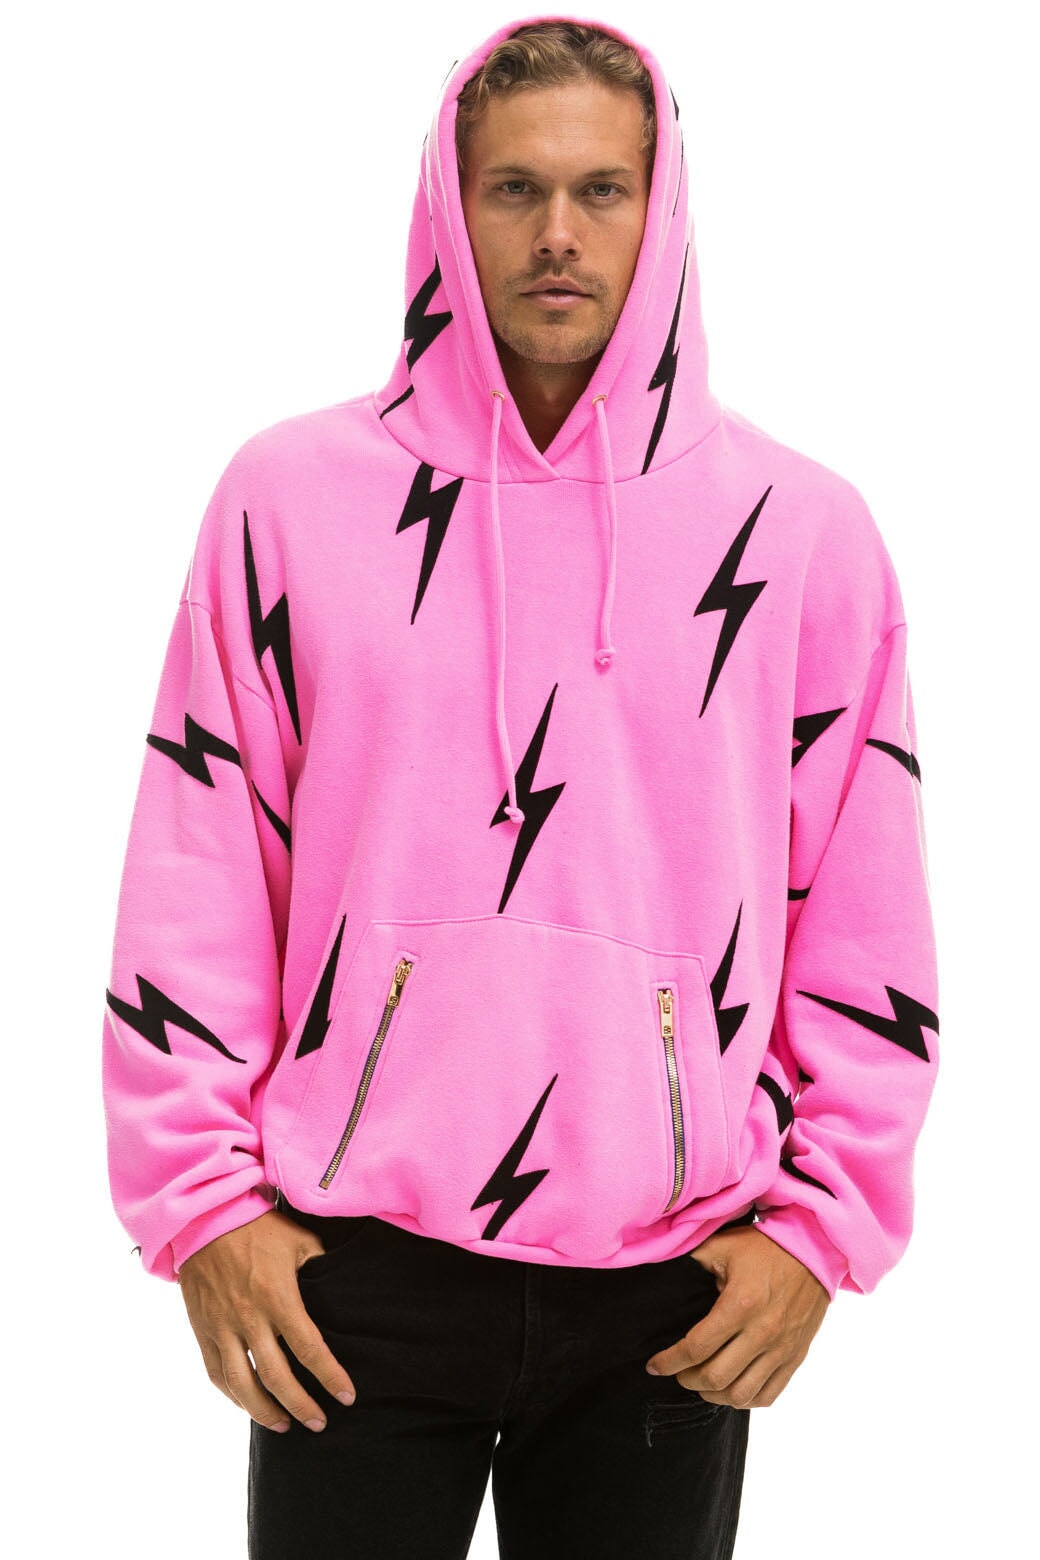 BOLT STITCH REPEAT RELAXED PULLOVER HOODIE WITH POCKET ZIPPERS - NEON PINK // BLACK Hoodie Aviator Nation 